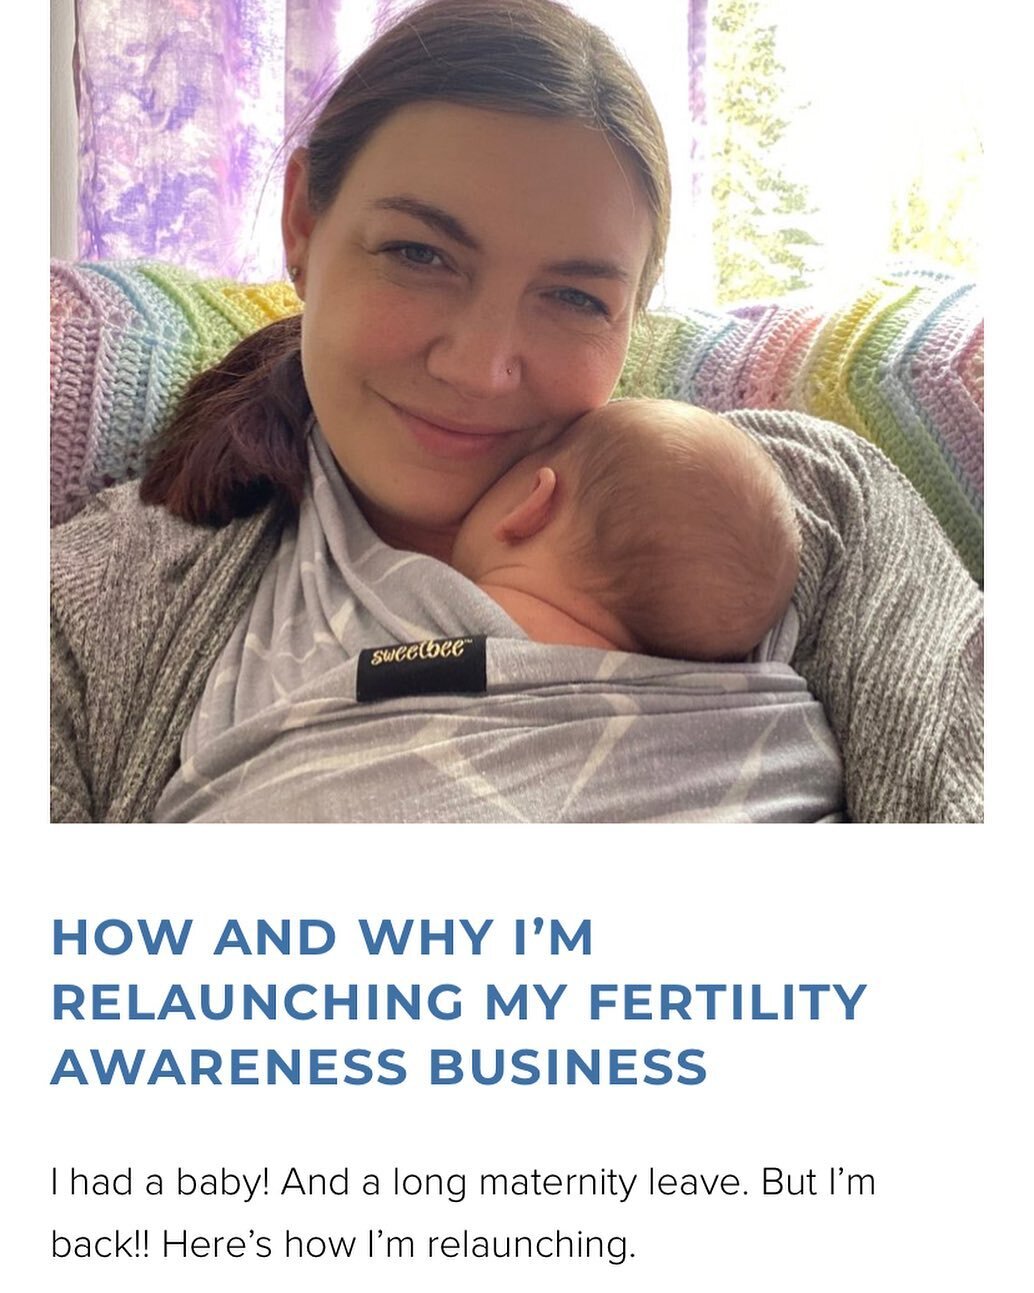 Check out my latest blog post for all the details on how and why I'm ready to relaunch my fertility awareness business.
 
Hint: I have a secret weapon! 

Link in bio 🙂
#fertilityawareness #relaunch @bebomiainc